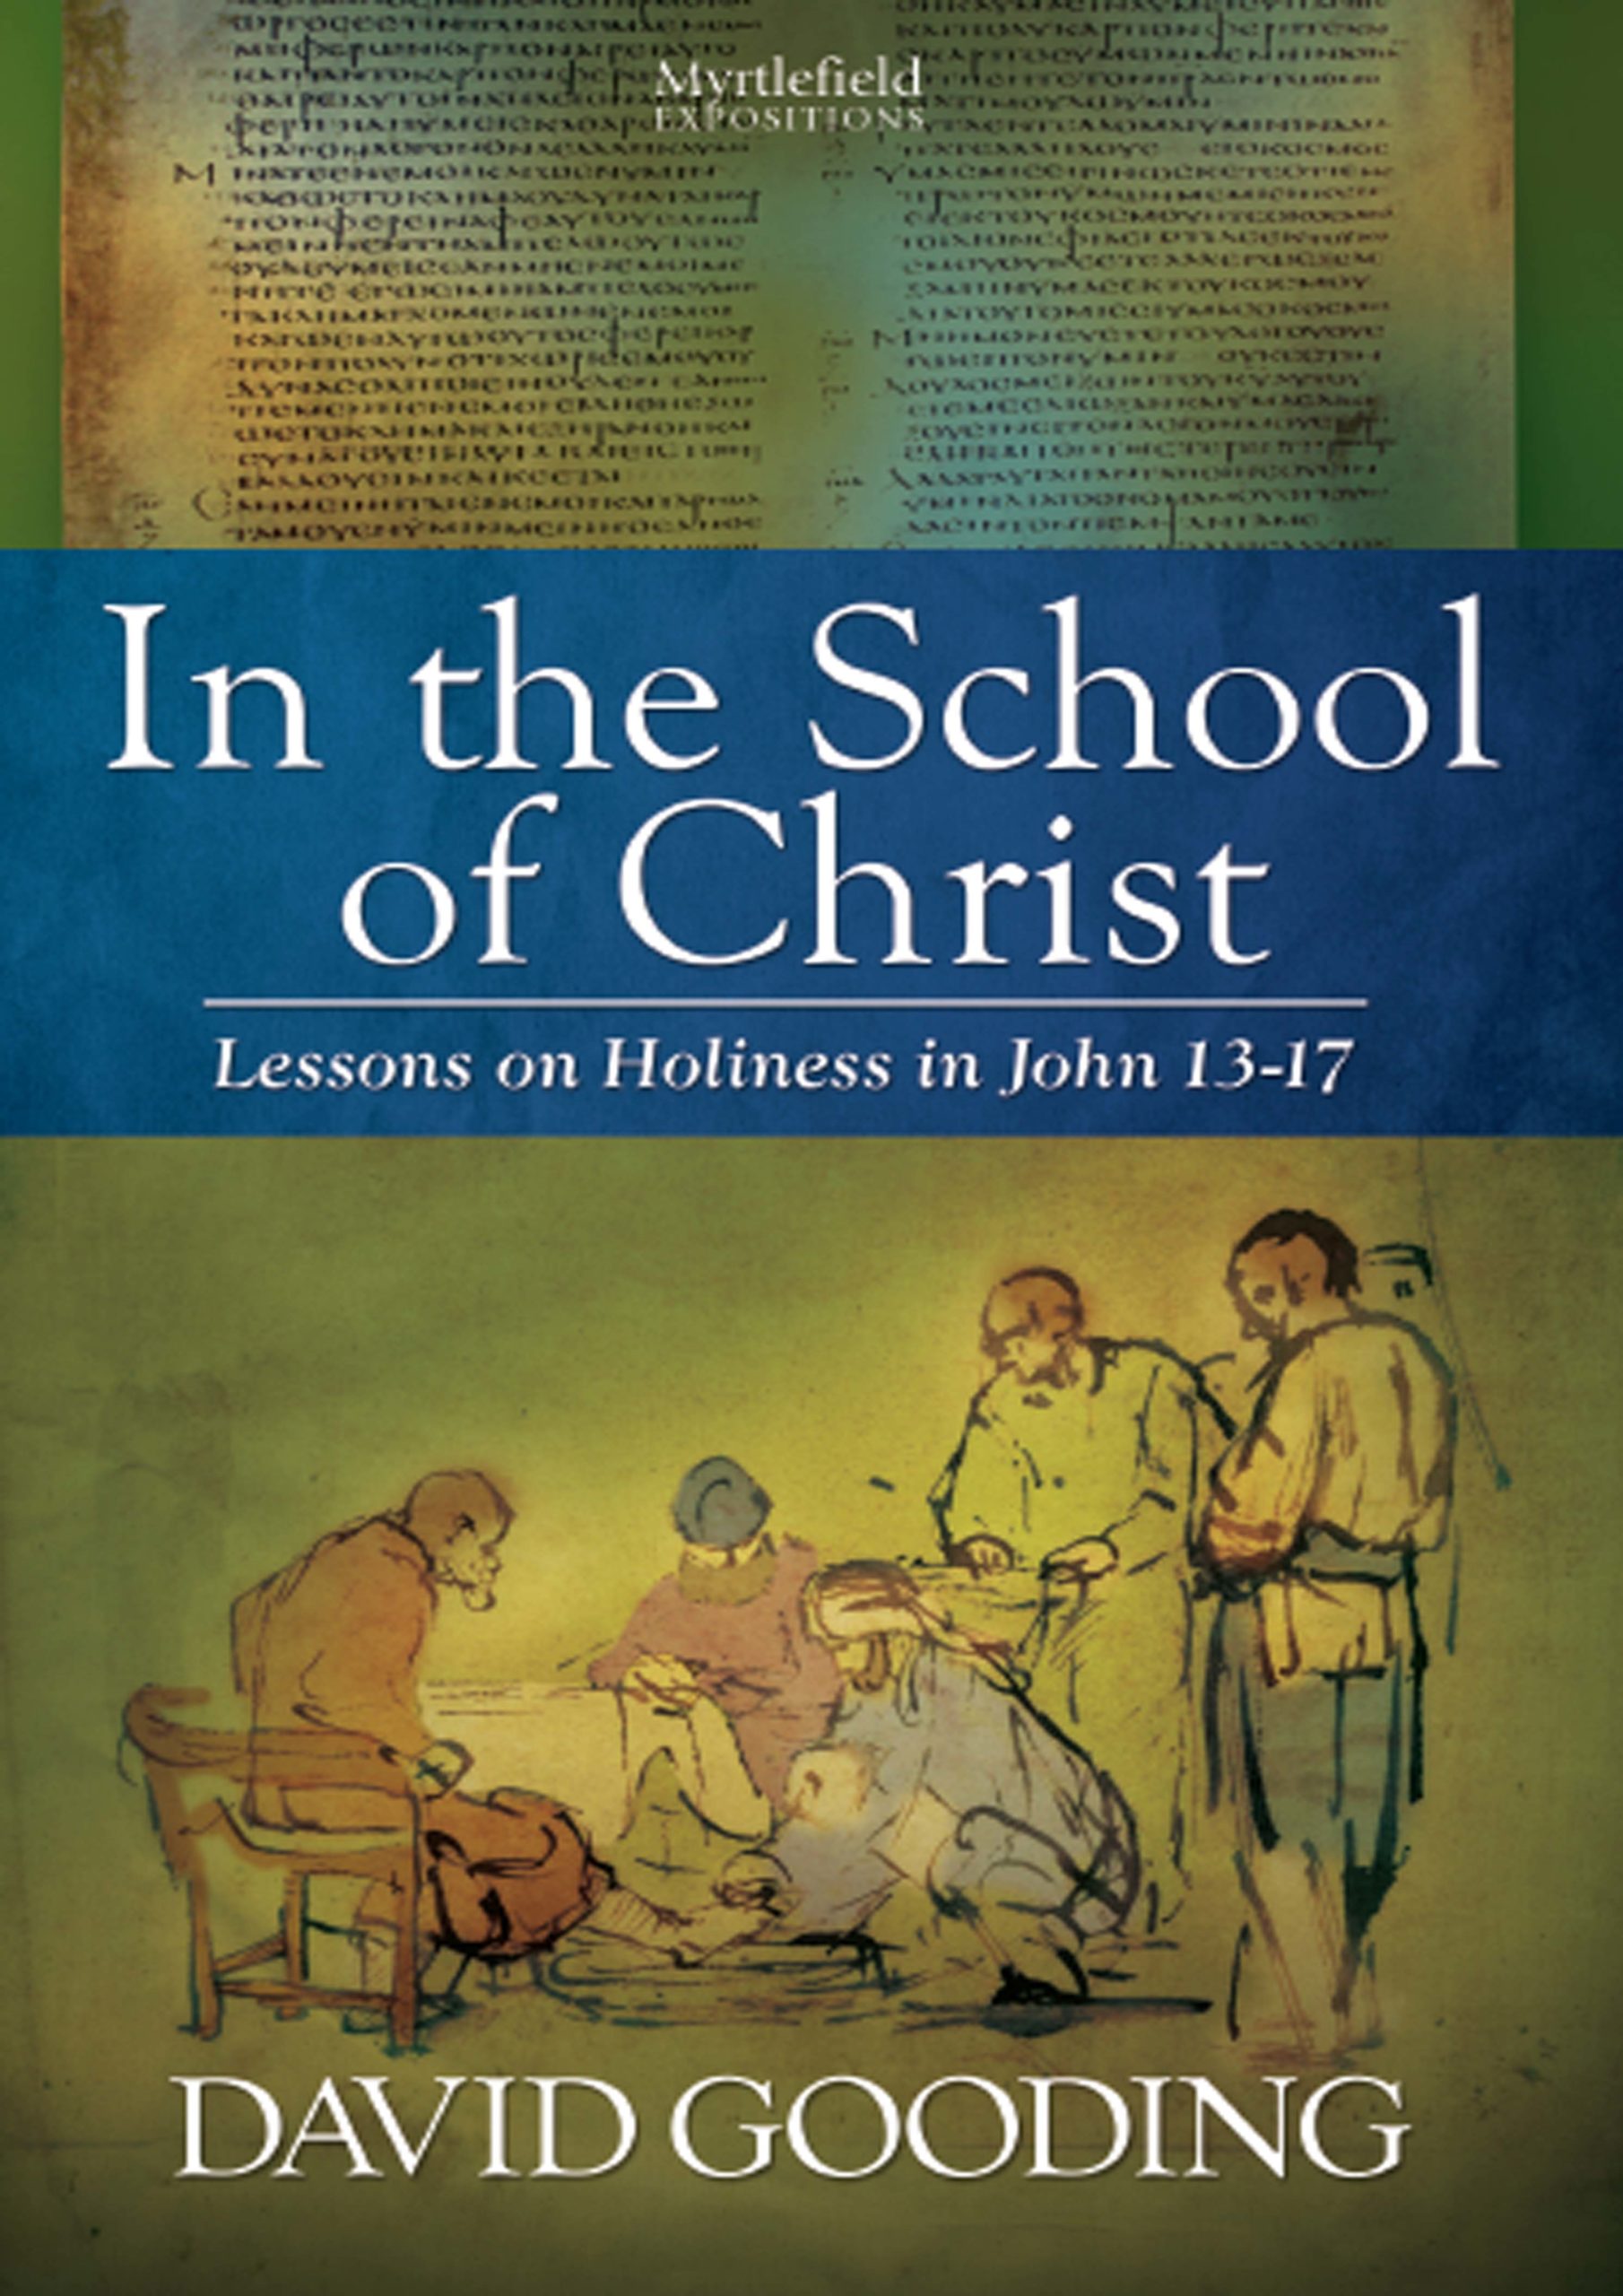 In the school of Christ lessons on Holiness in John 13-17 